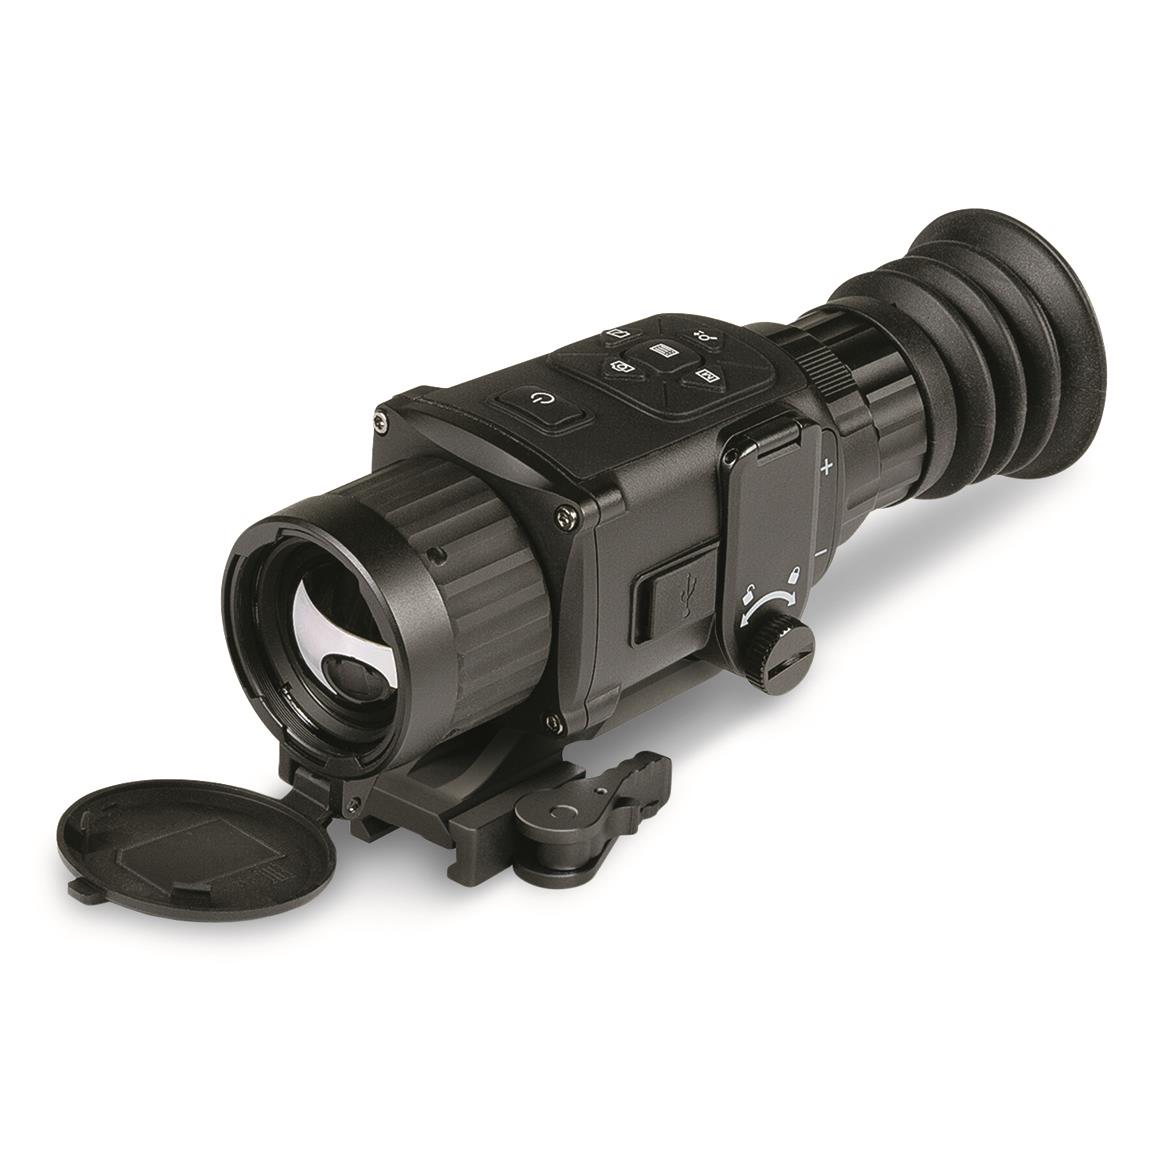 AGM Rattler TS25-384 Compact Thermal Imaging Rifle Scope